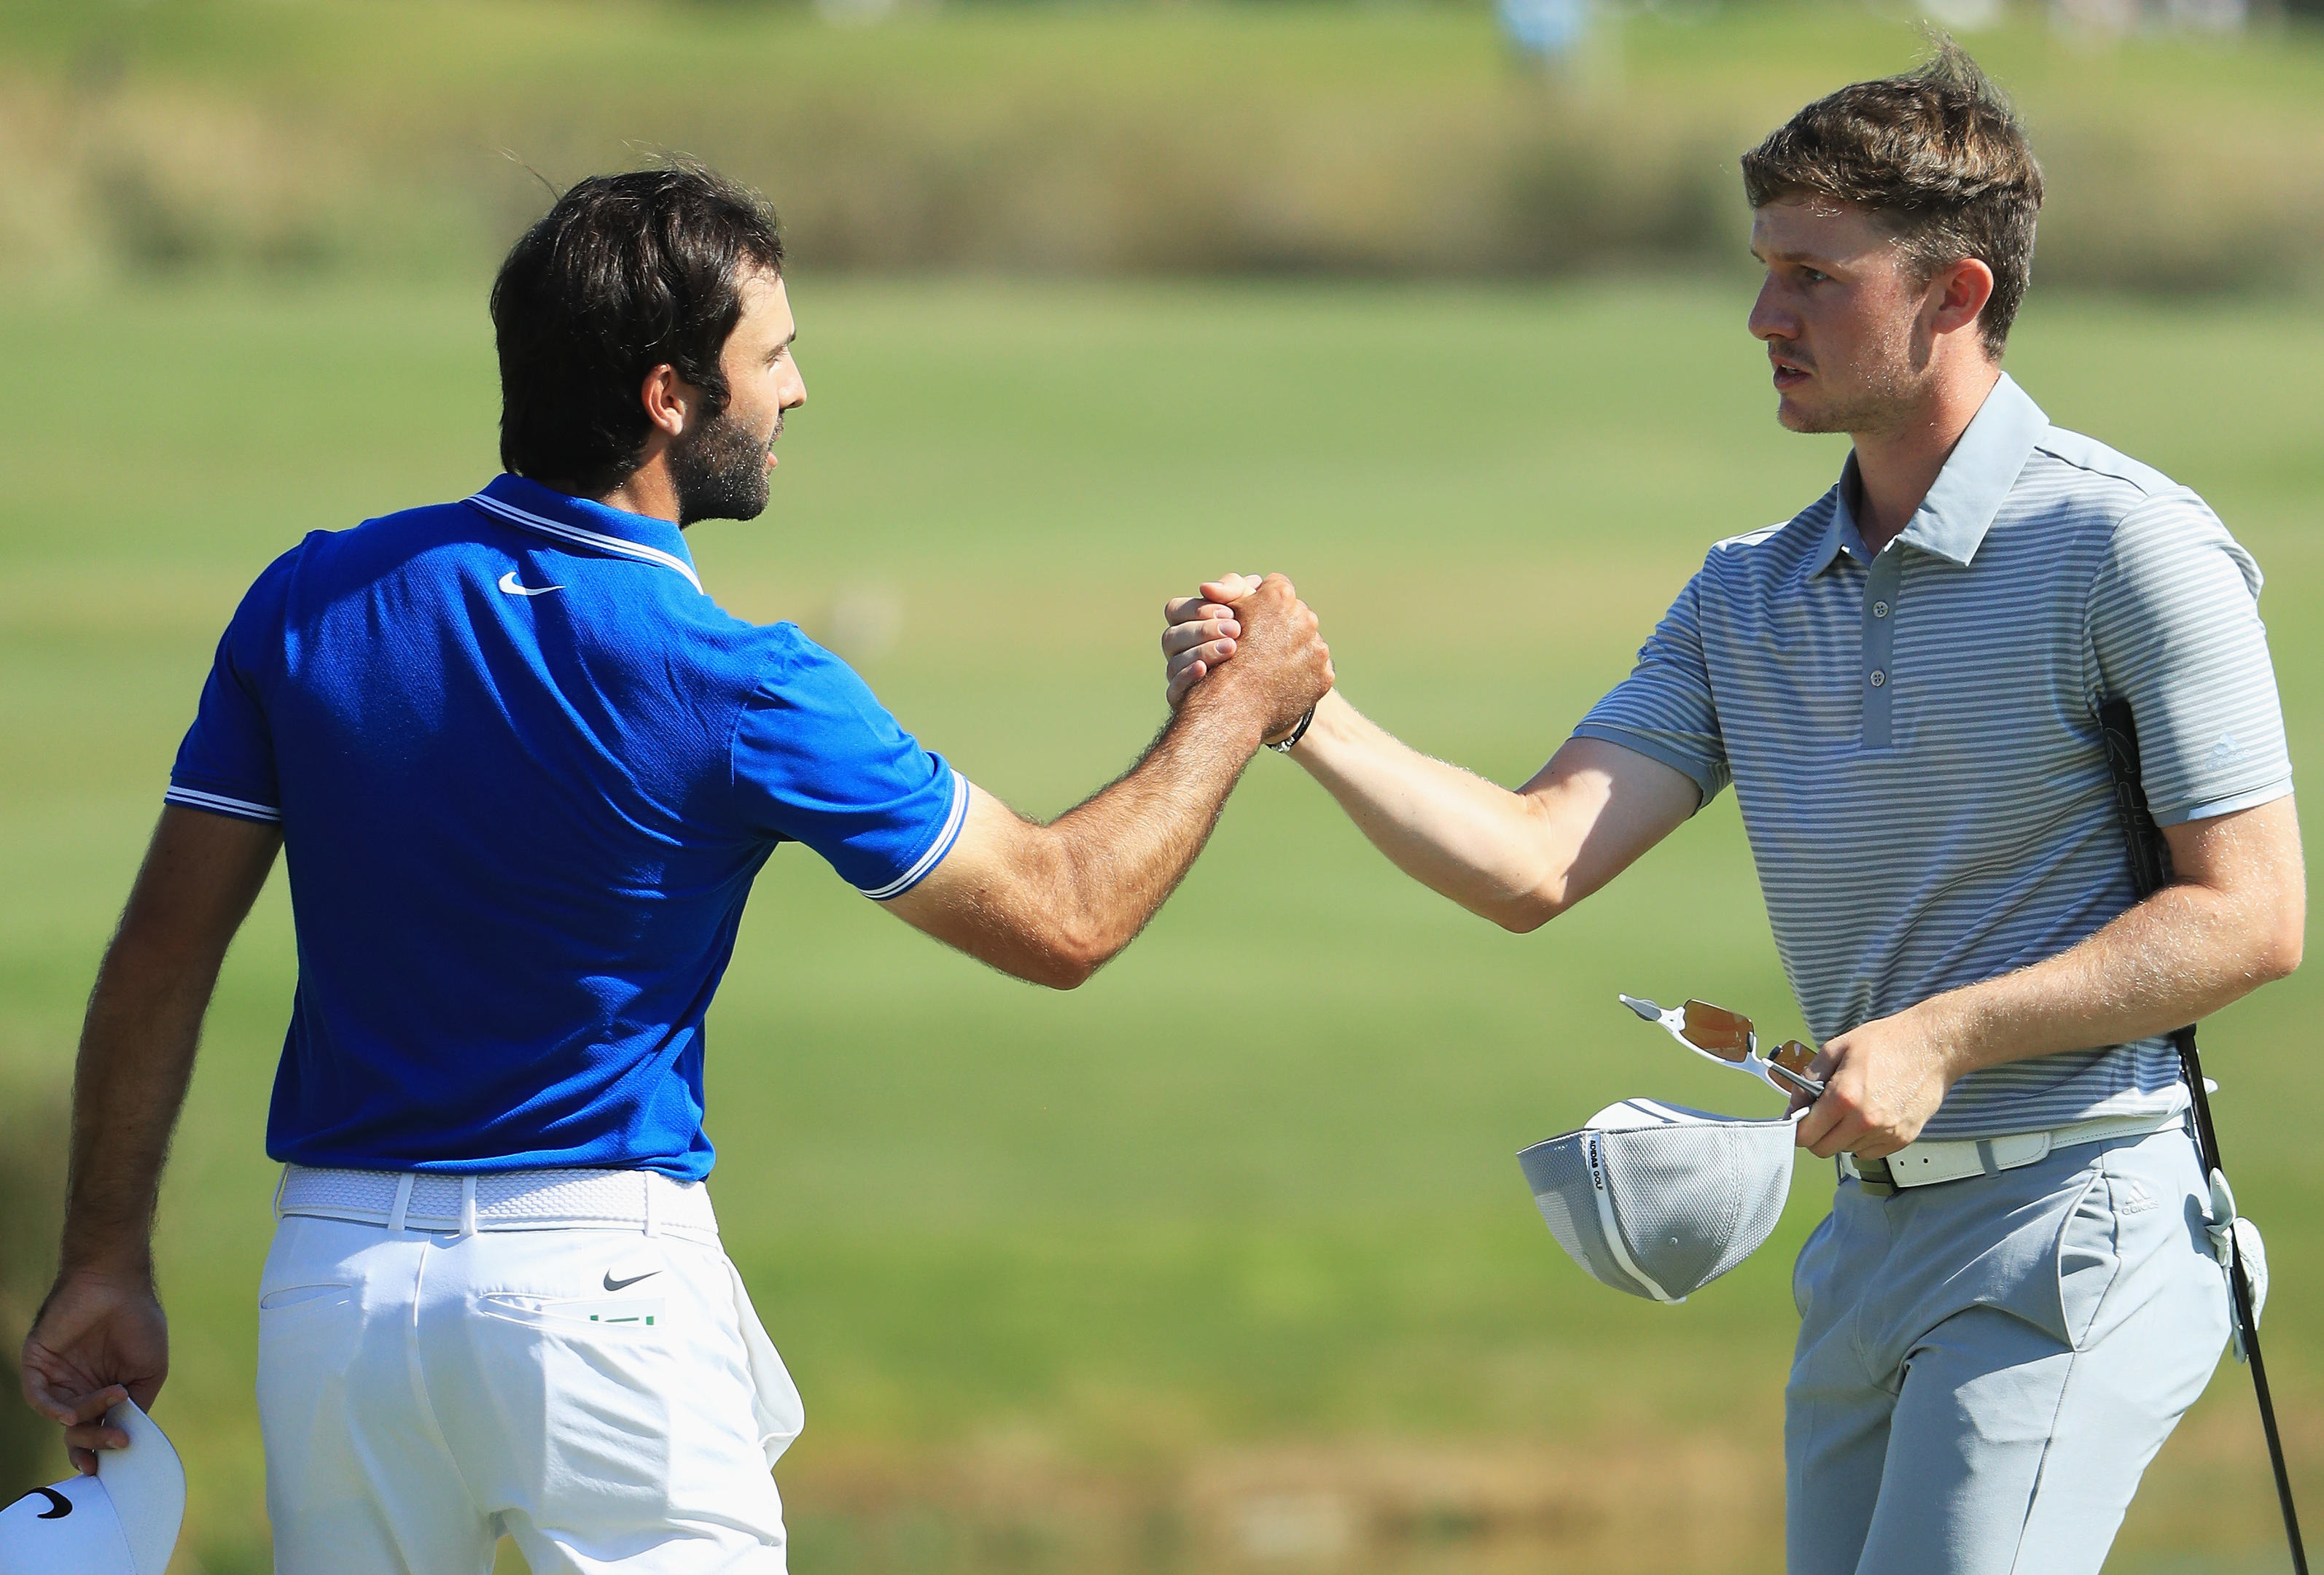 Connor Syme (R) of Scotland shakes hands with playing partner Joel Stalter at the end of yesterday's final round in Portugal.